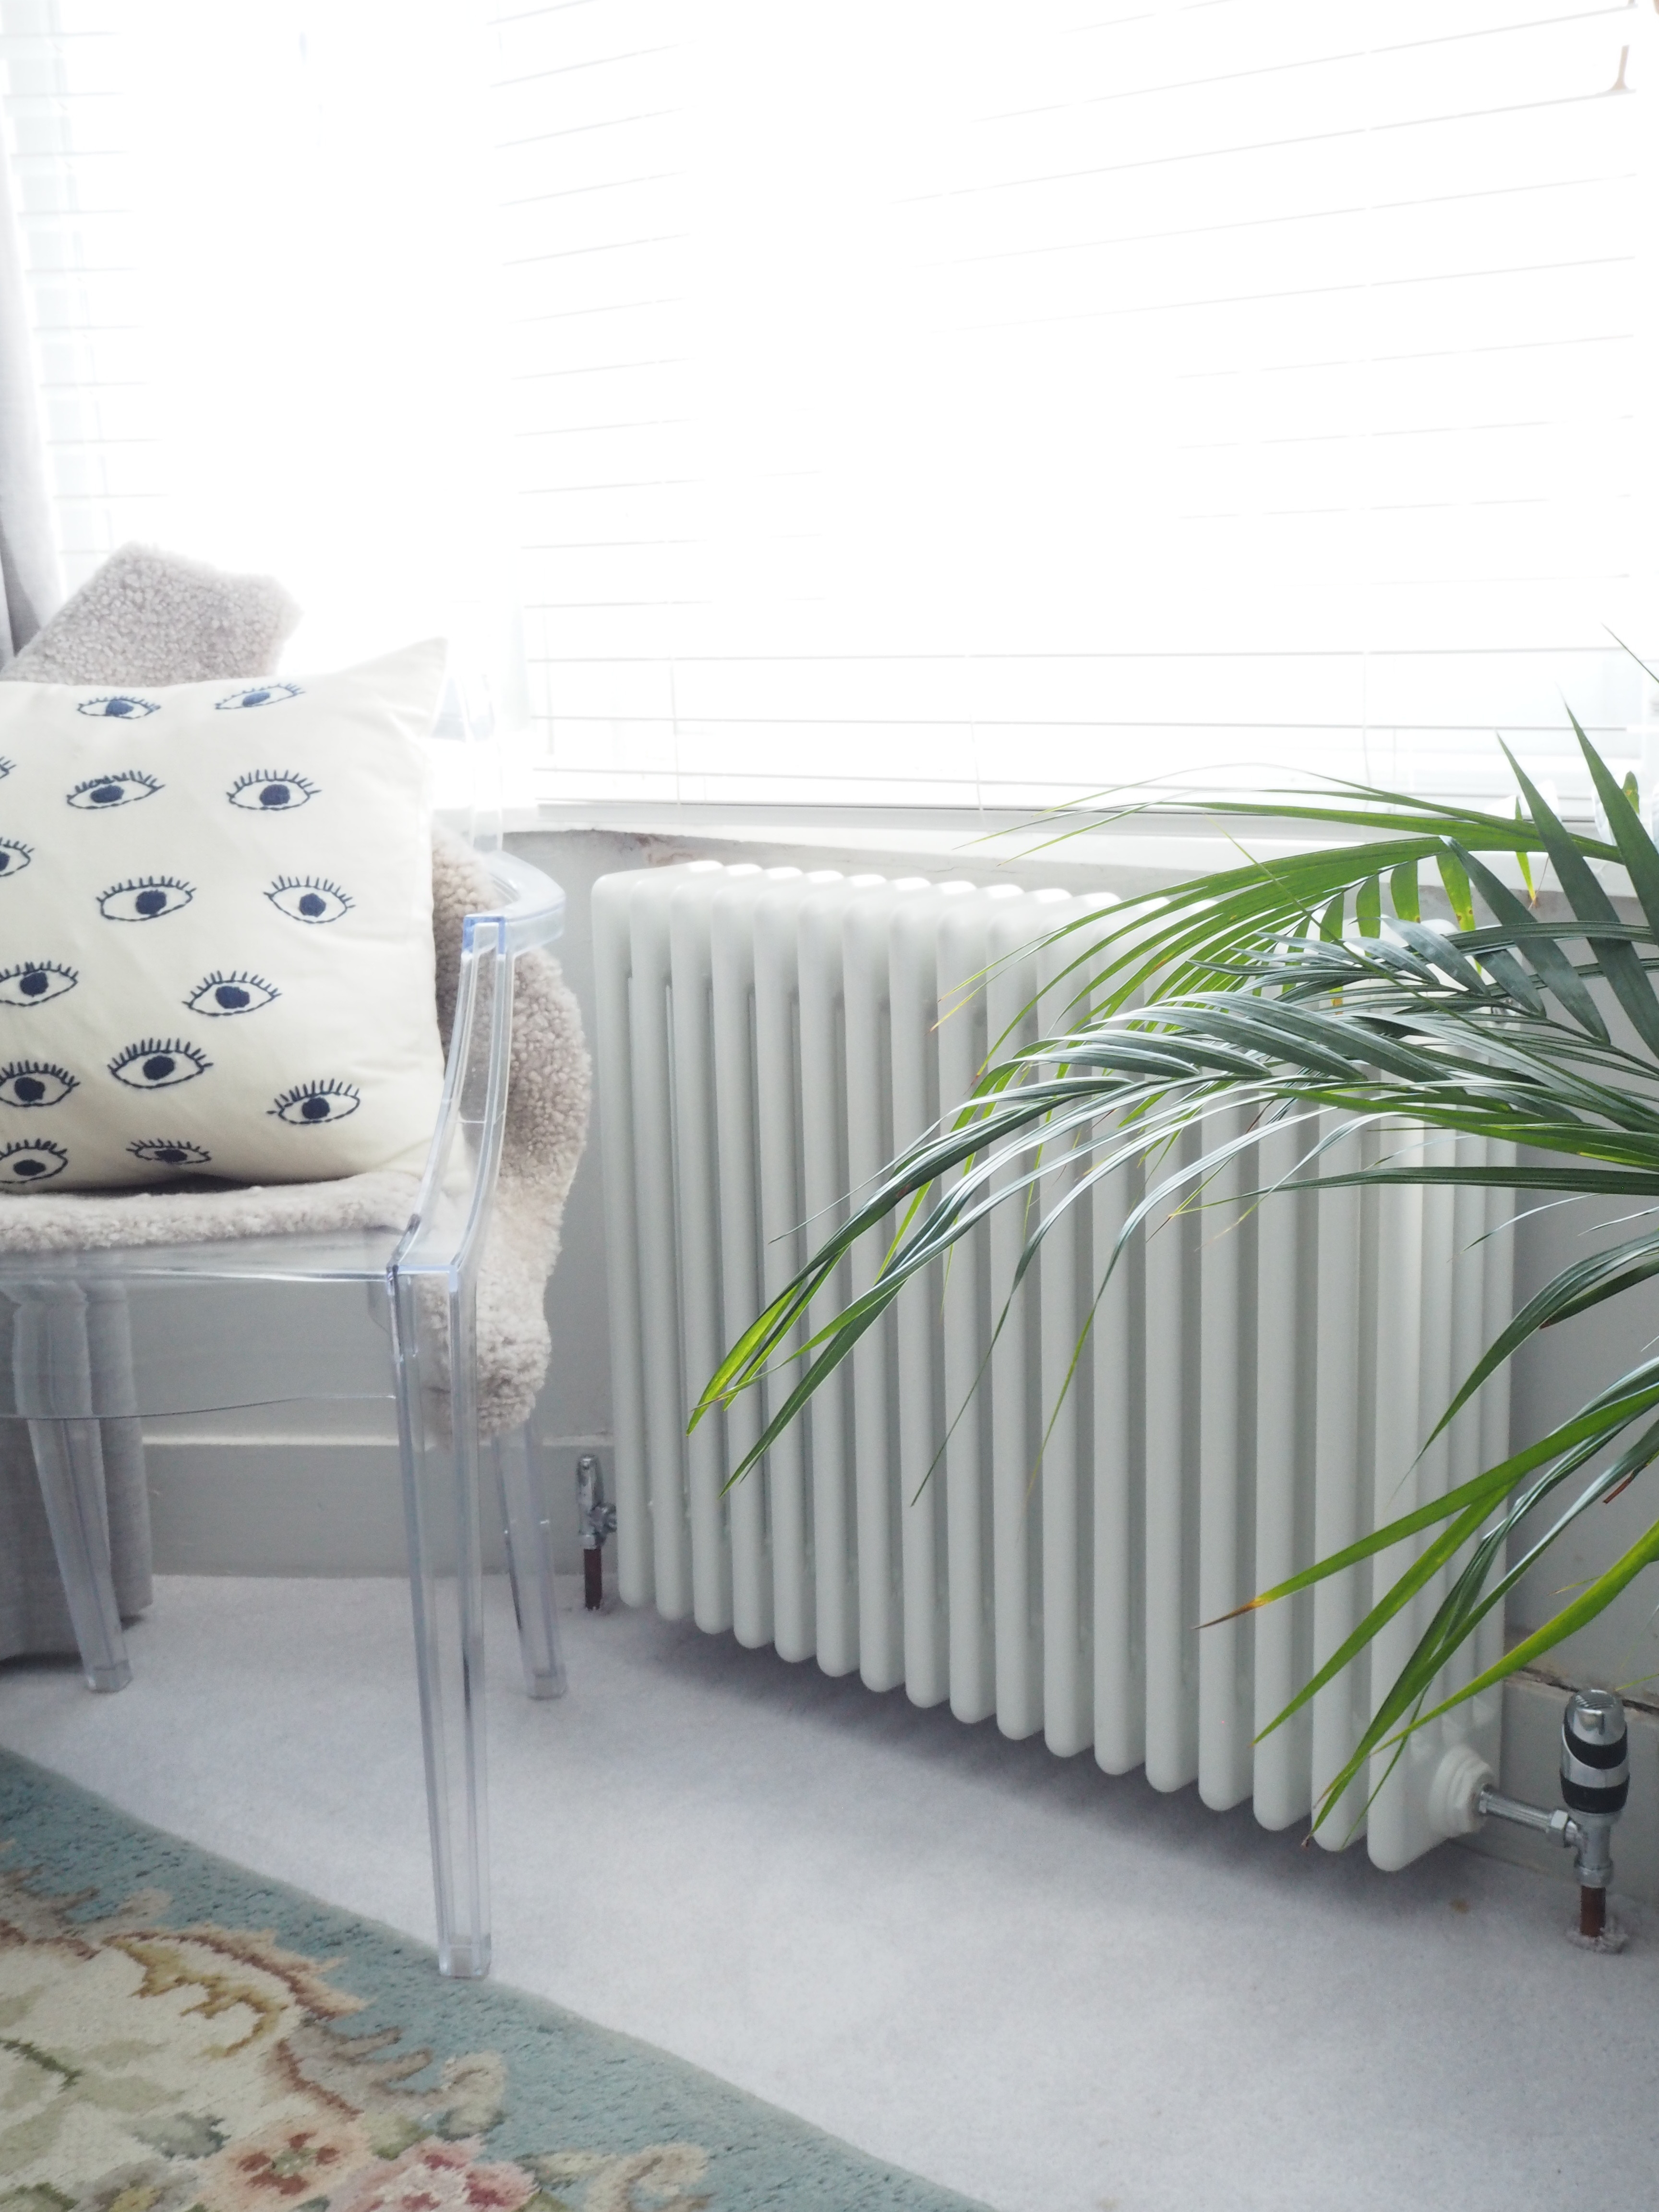 Planning a central heating update? Discover how important BTUs are when picking the right radiator for your home by Homes blogger Maxine Brady